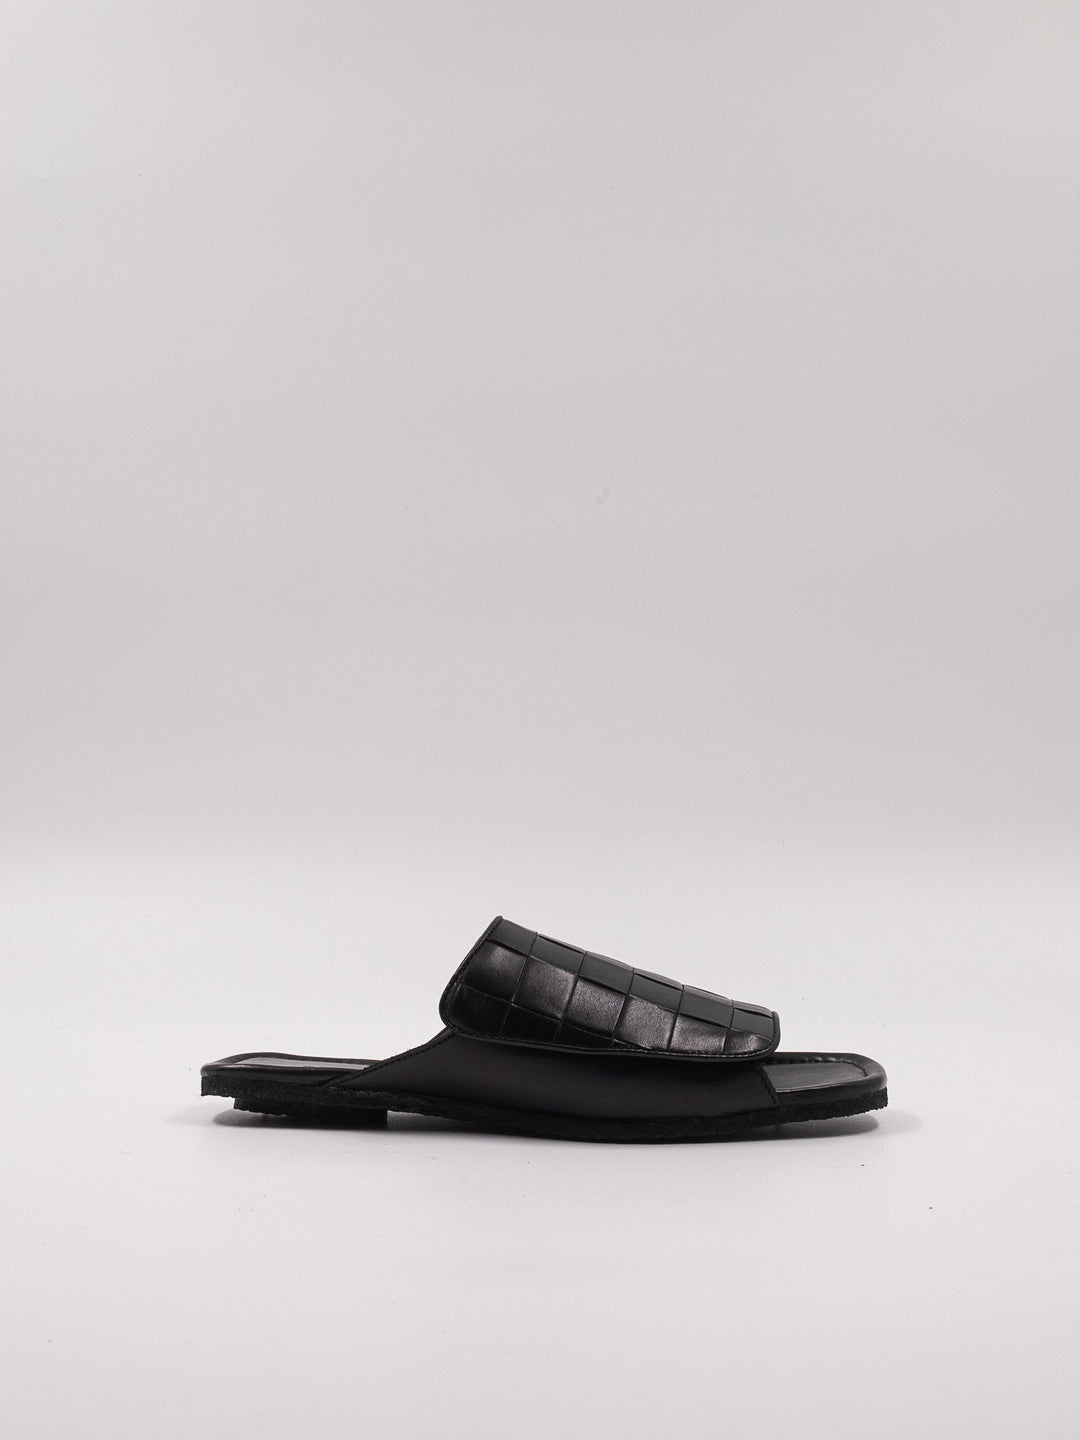 Blankens black flat leather sandal The Alassio Open